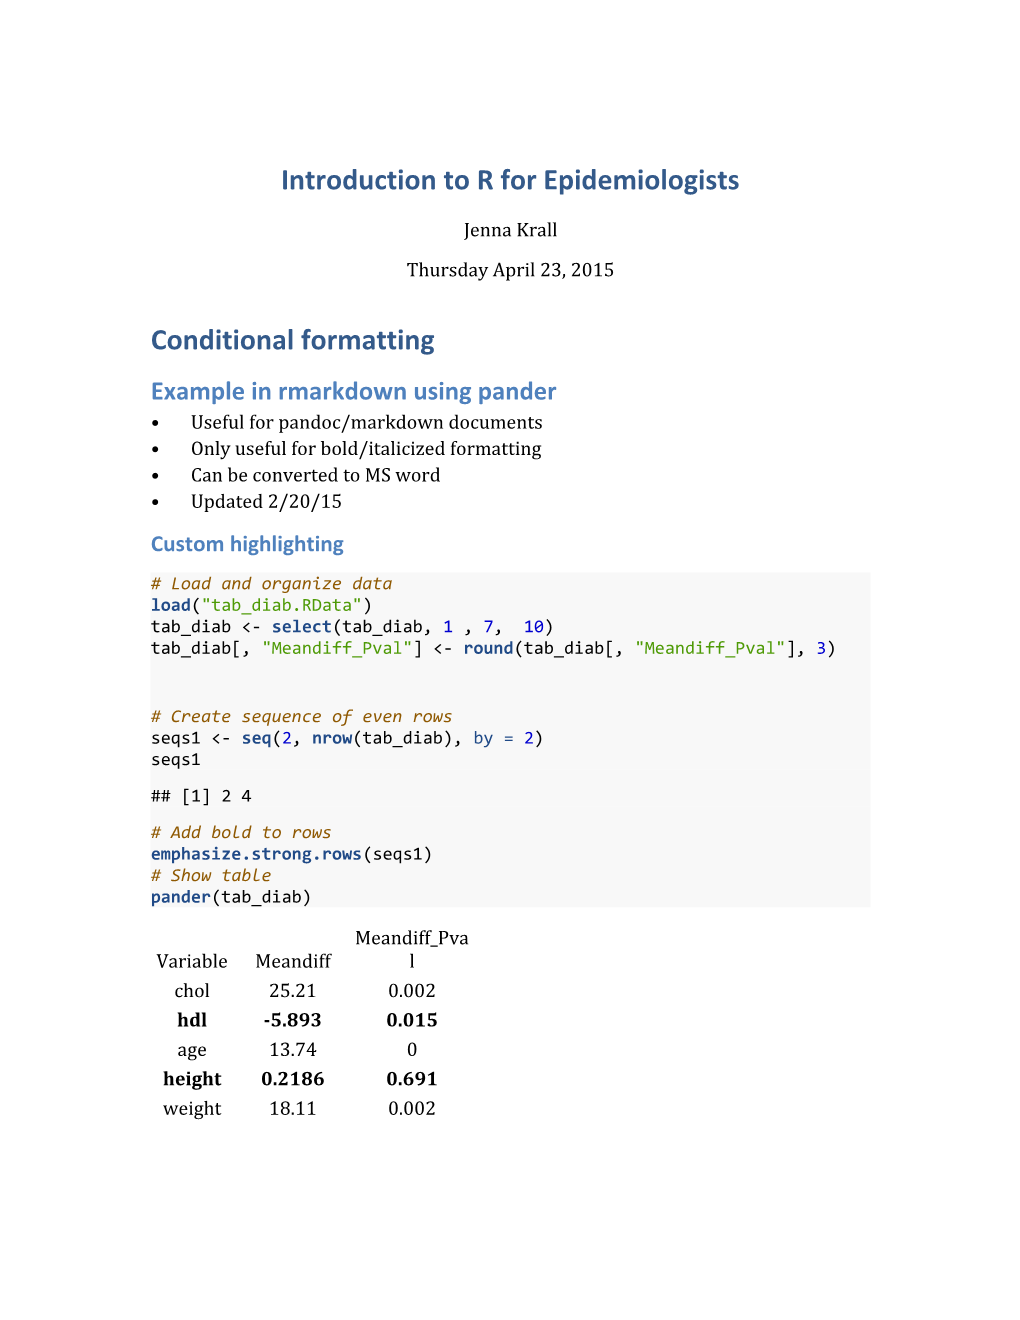 Introduction to R for Epidemiologists